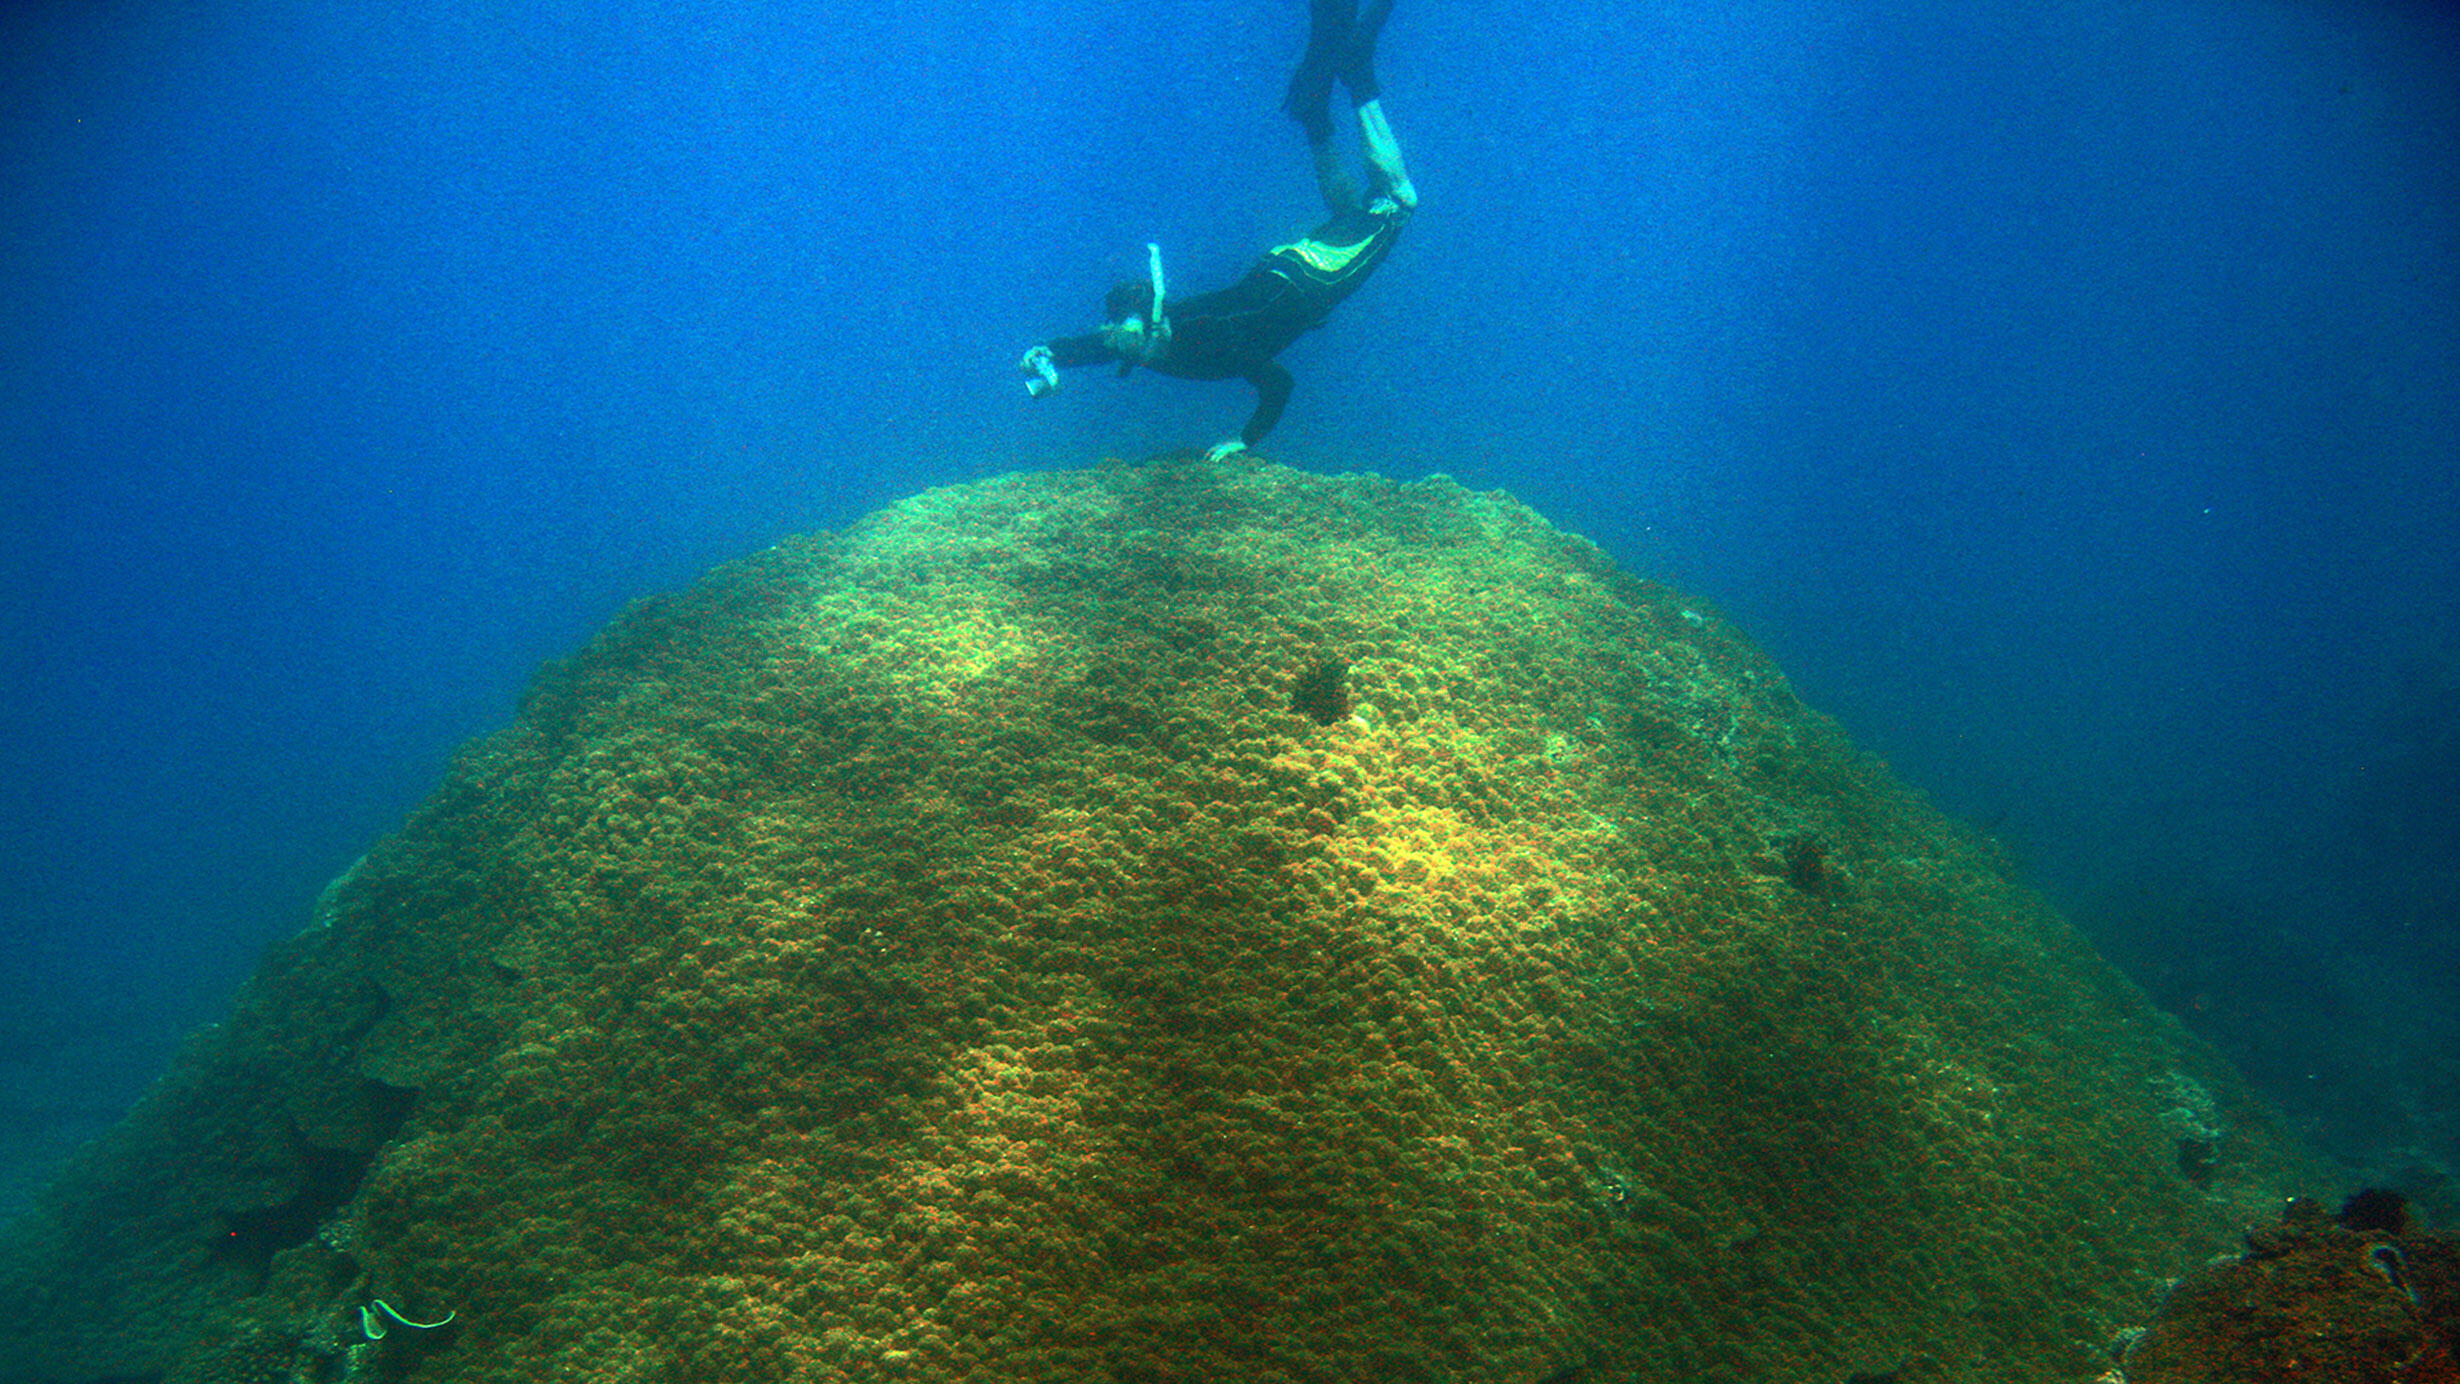 A diver touches the surface of a very large, dome-shaped coral underwater.